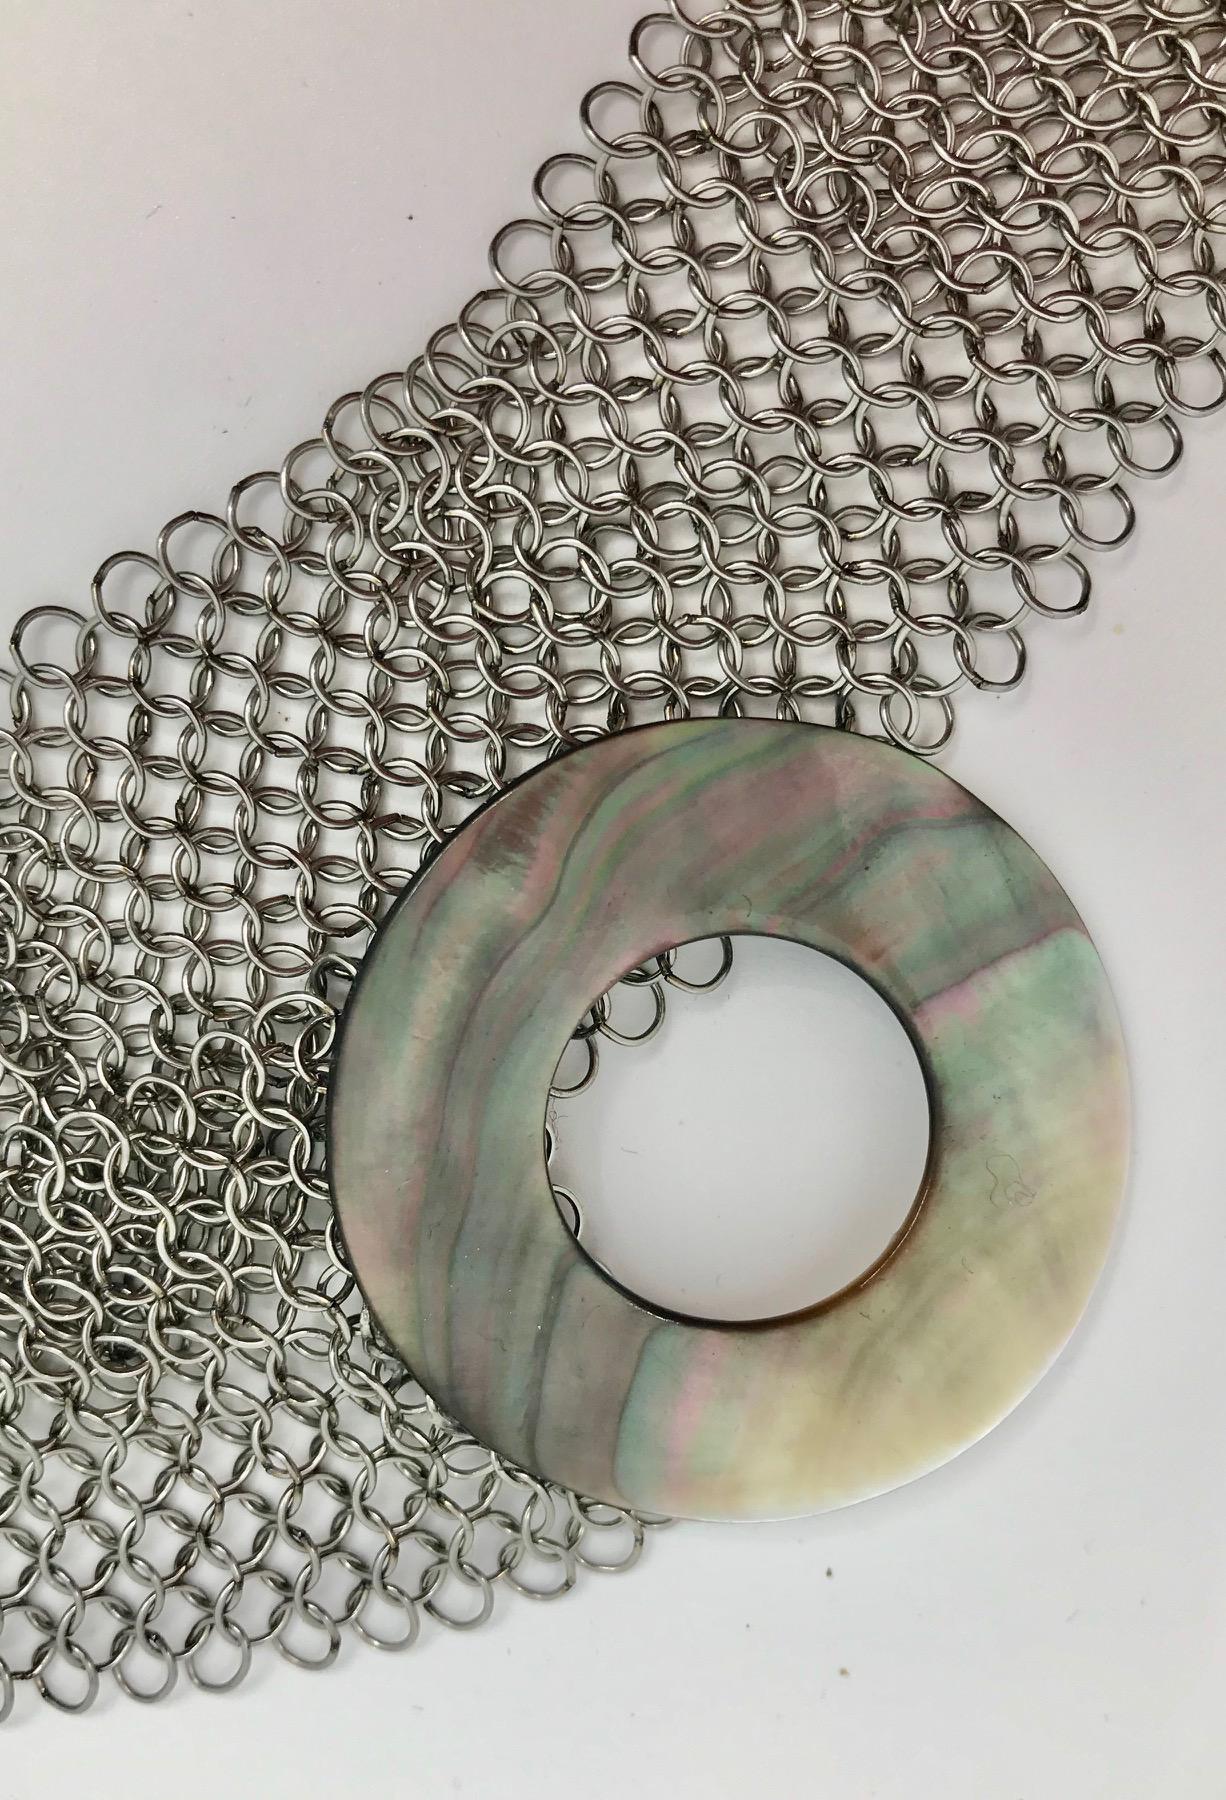 SYLVIA GOTTWALD, Black Mother of Pearl , Necklace /Belt on Stainless Steel Mesh. For Sale 1